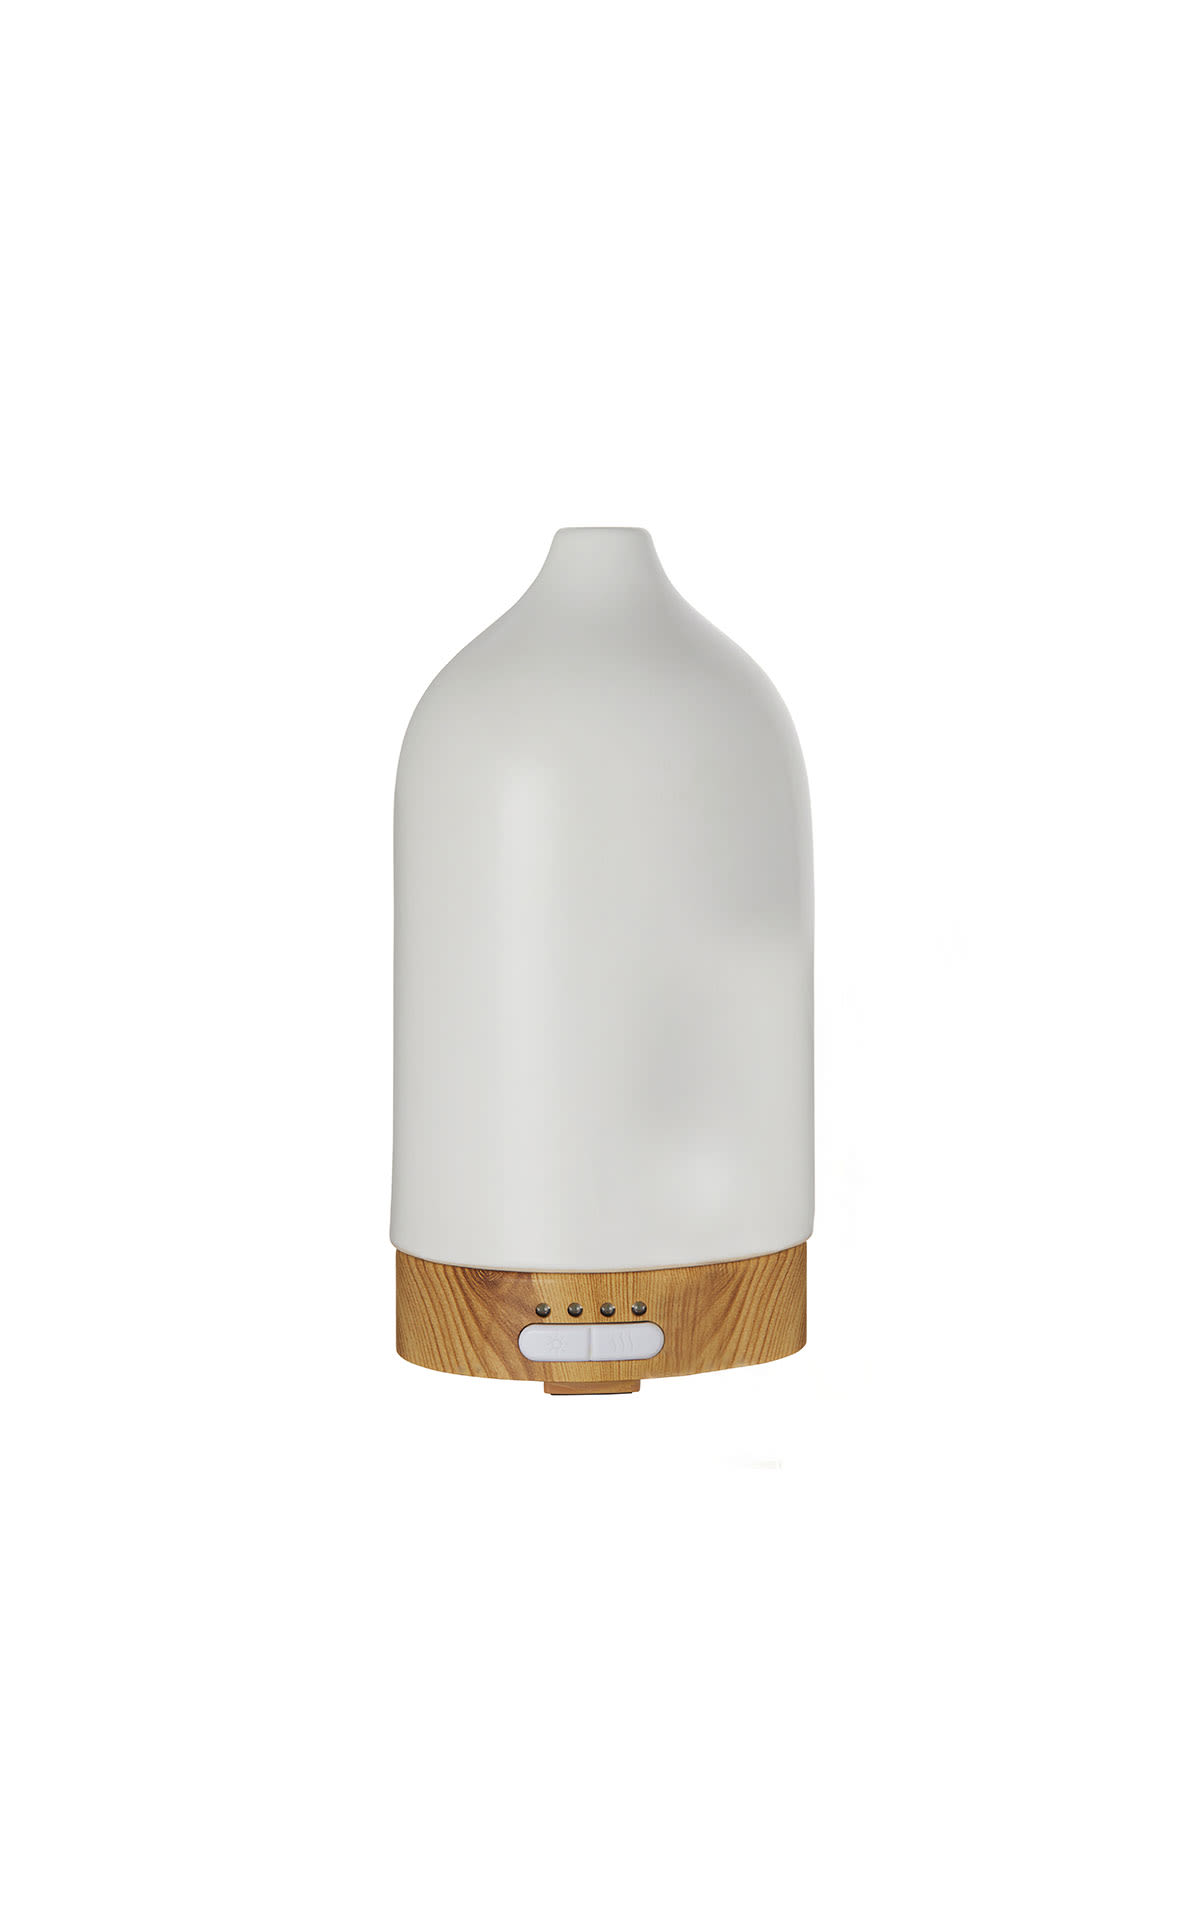 The White Company Electronic diffuser  from Bicester Village